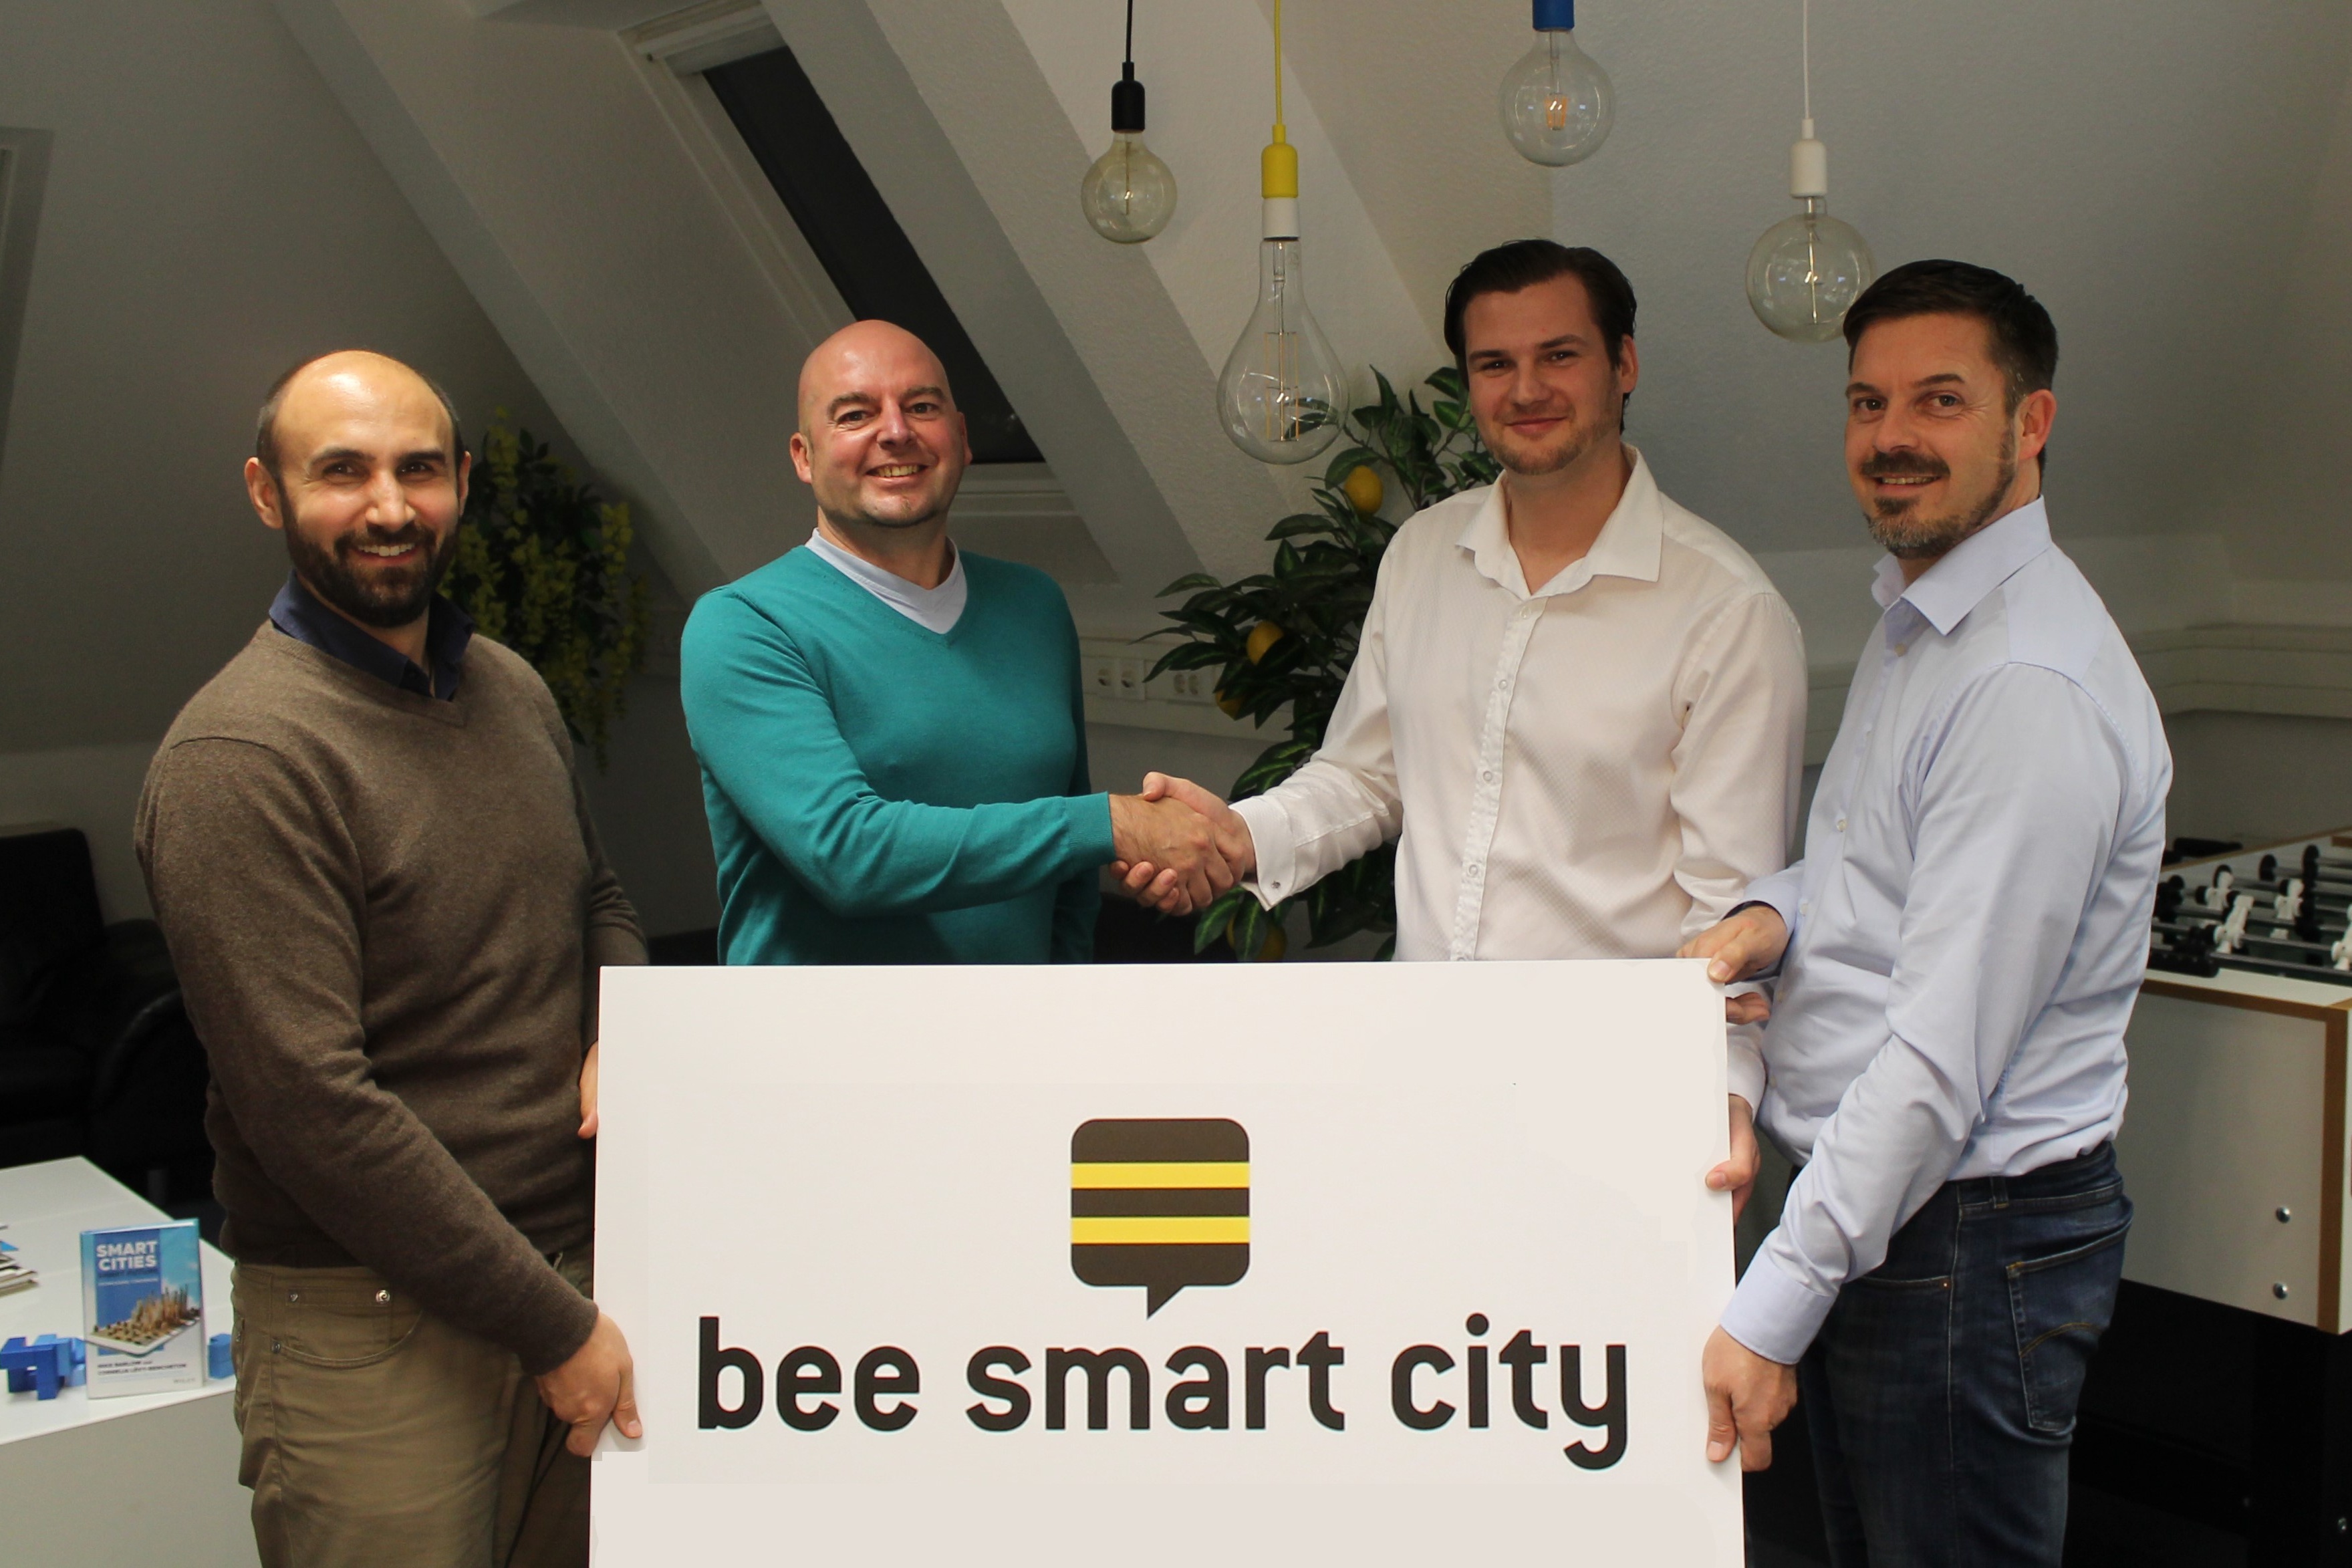 Bee Smart City will tap into the collective intelligence of smart city actors around the globe